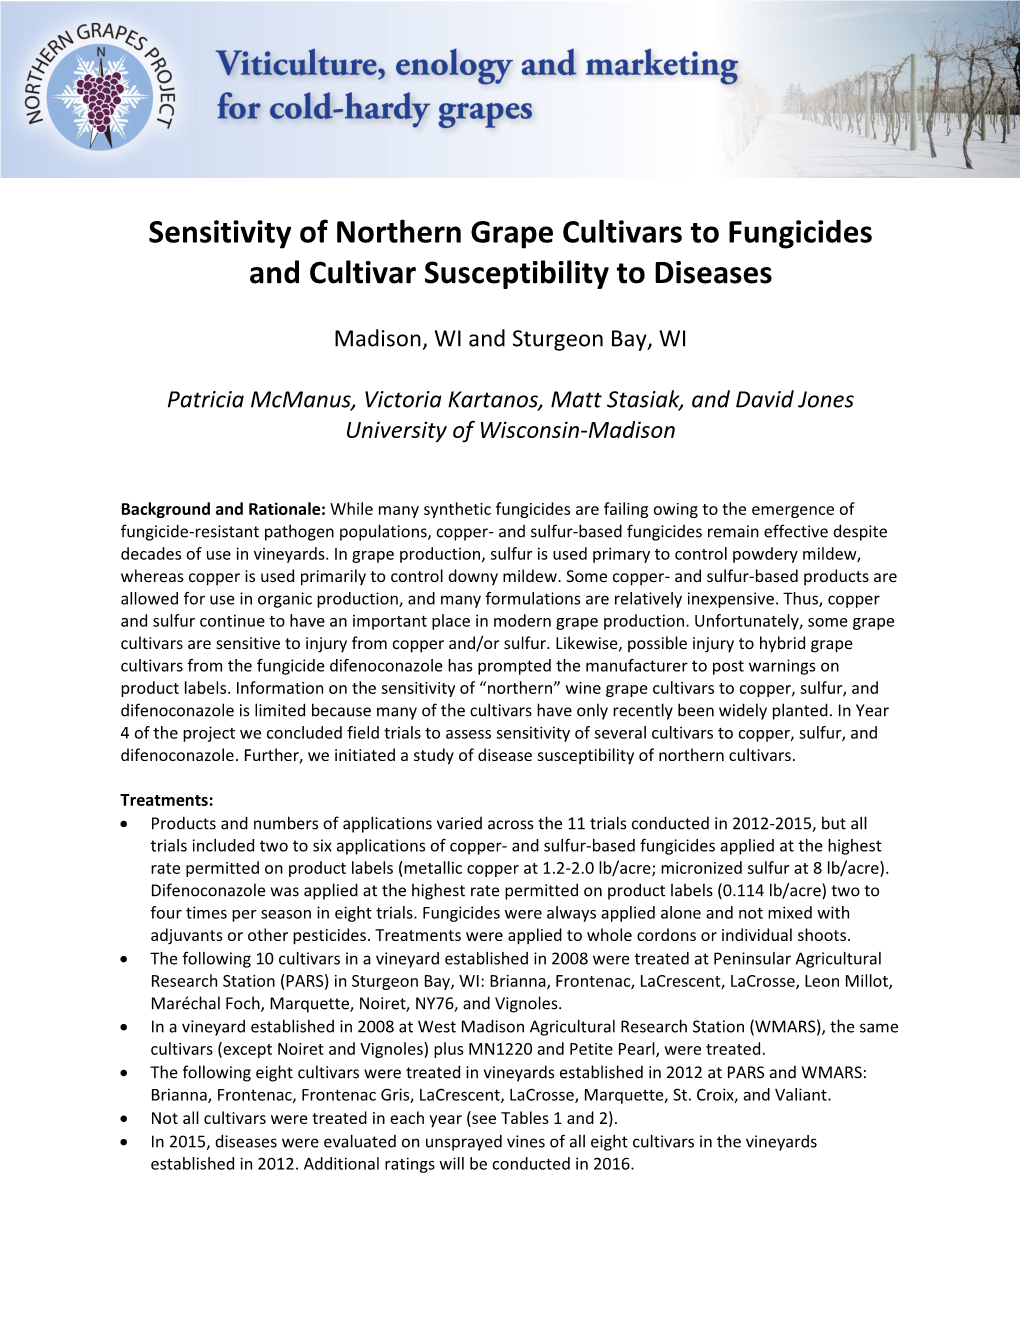 Sensitivity of Northern Grape Cultivars to Fungicides and Cultivar Susceptibility to Diseases